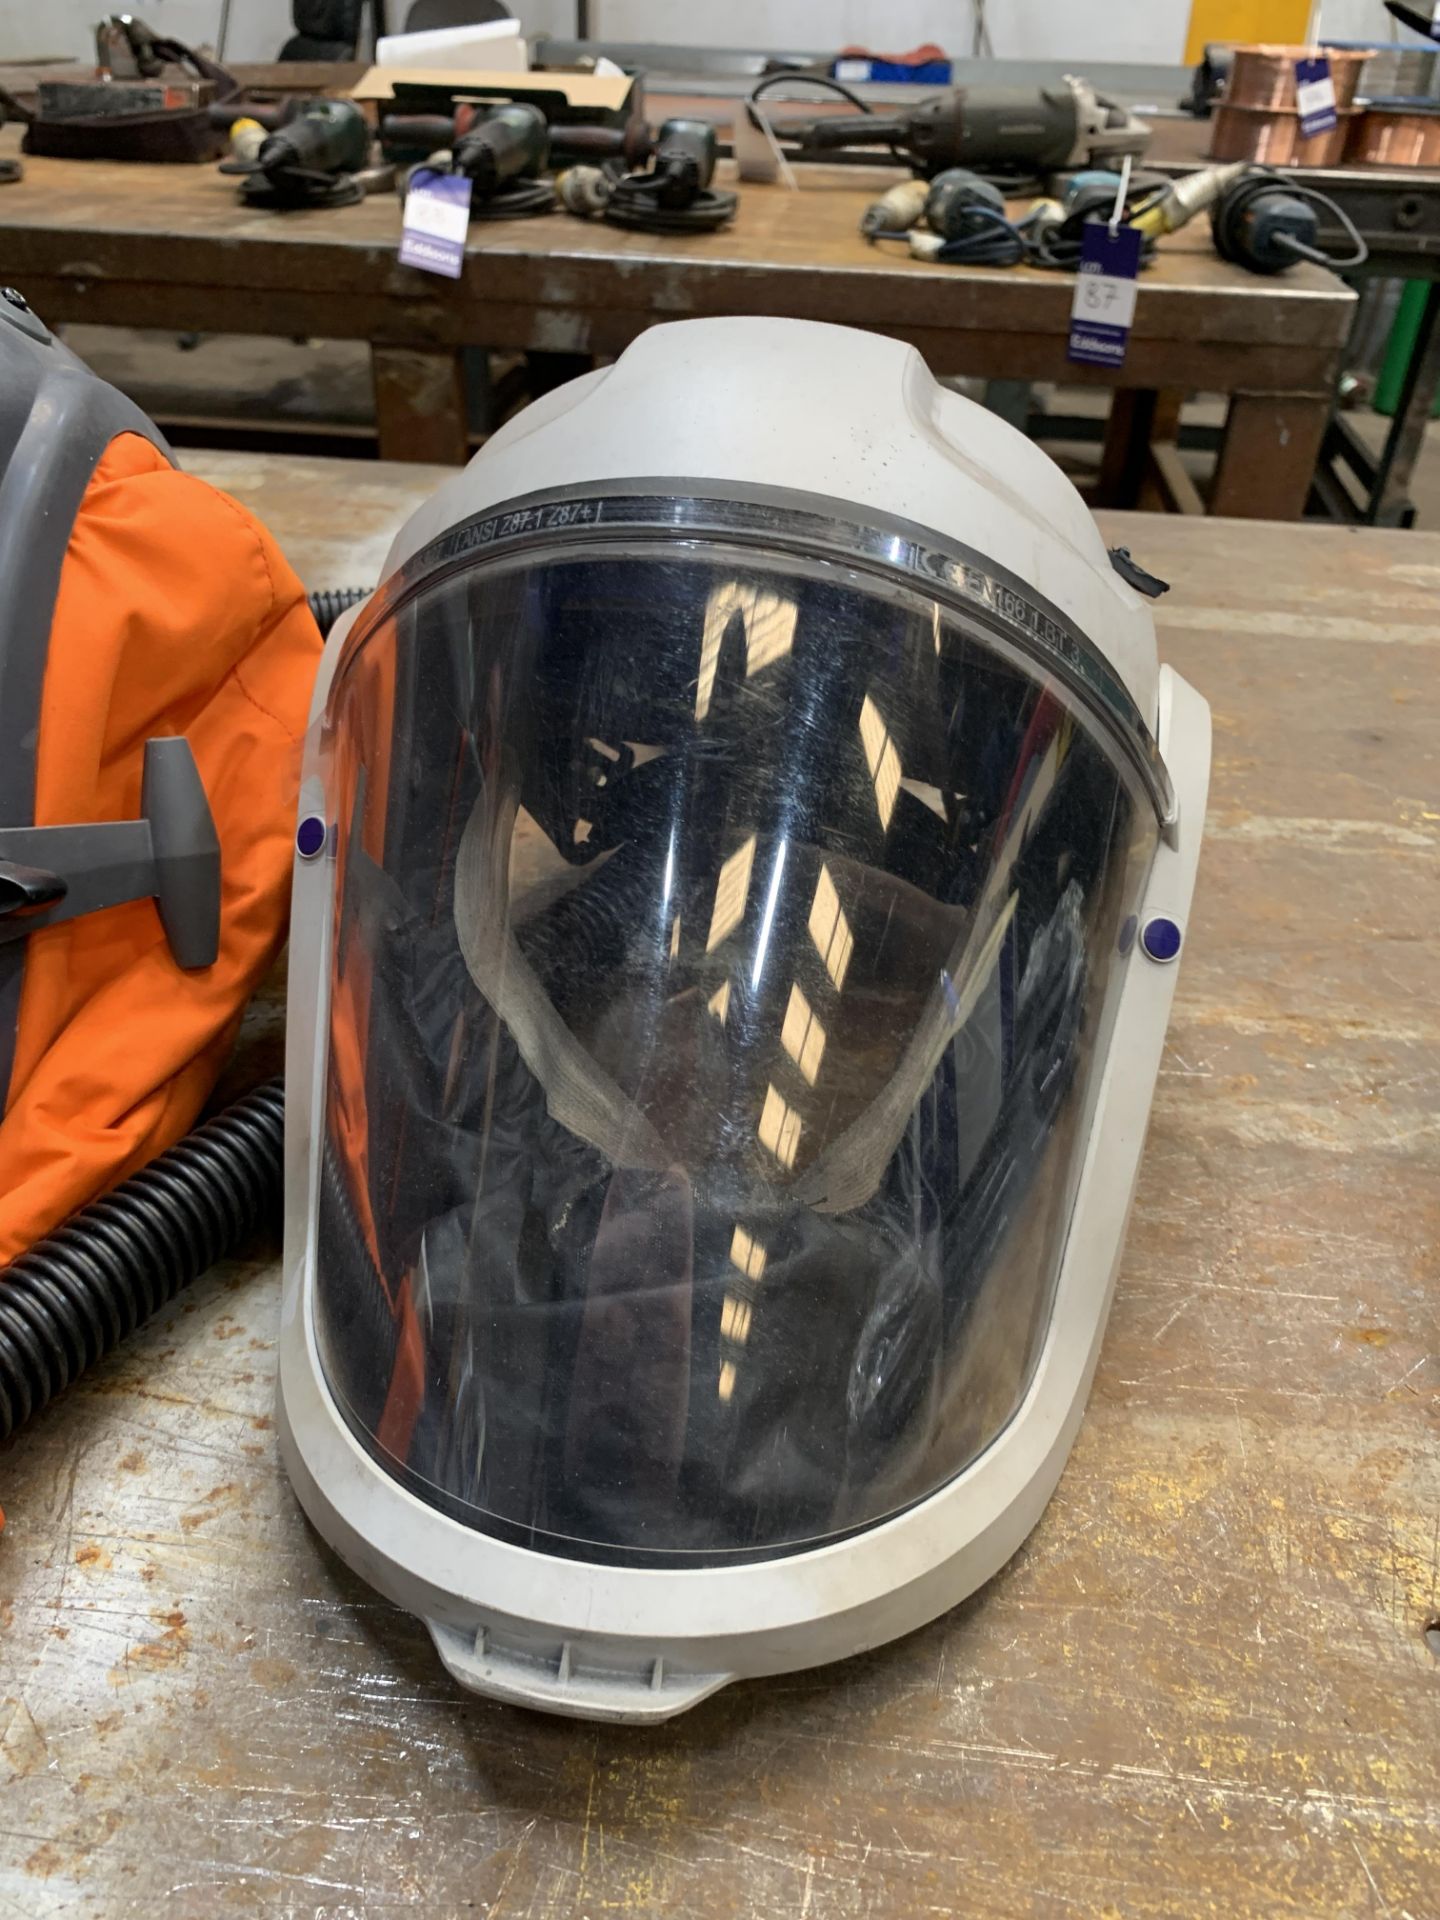 Silencer welding mask, with integrated ear defenders, and 3M welding mask - Image 3 of 3